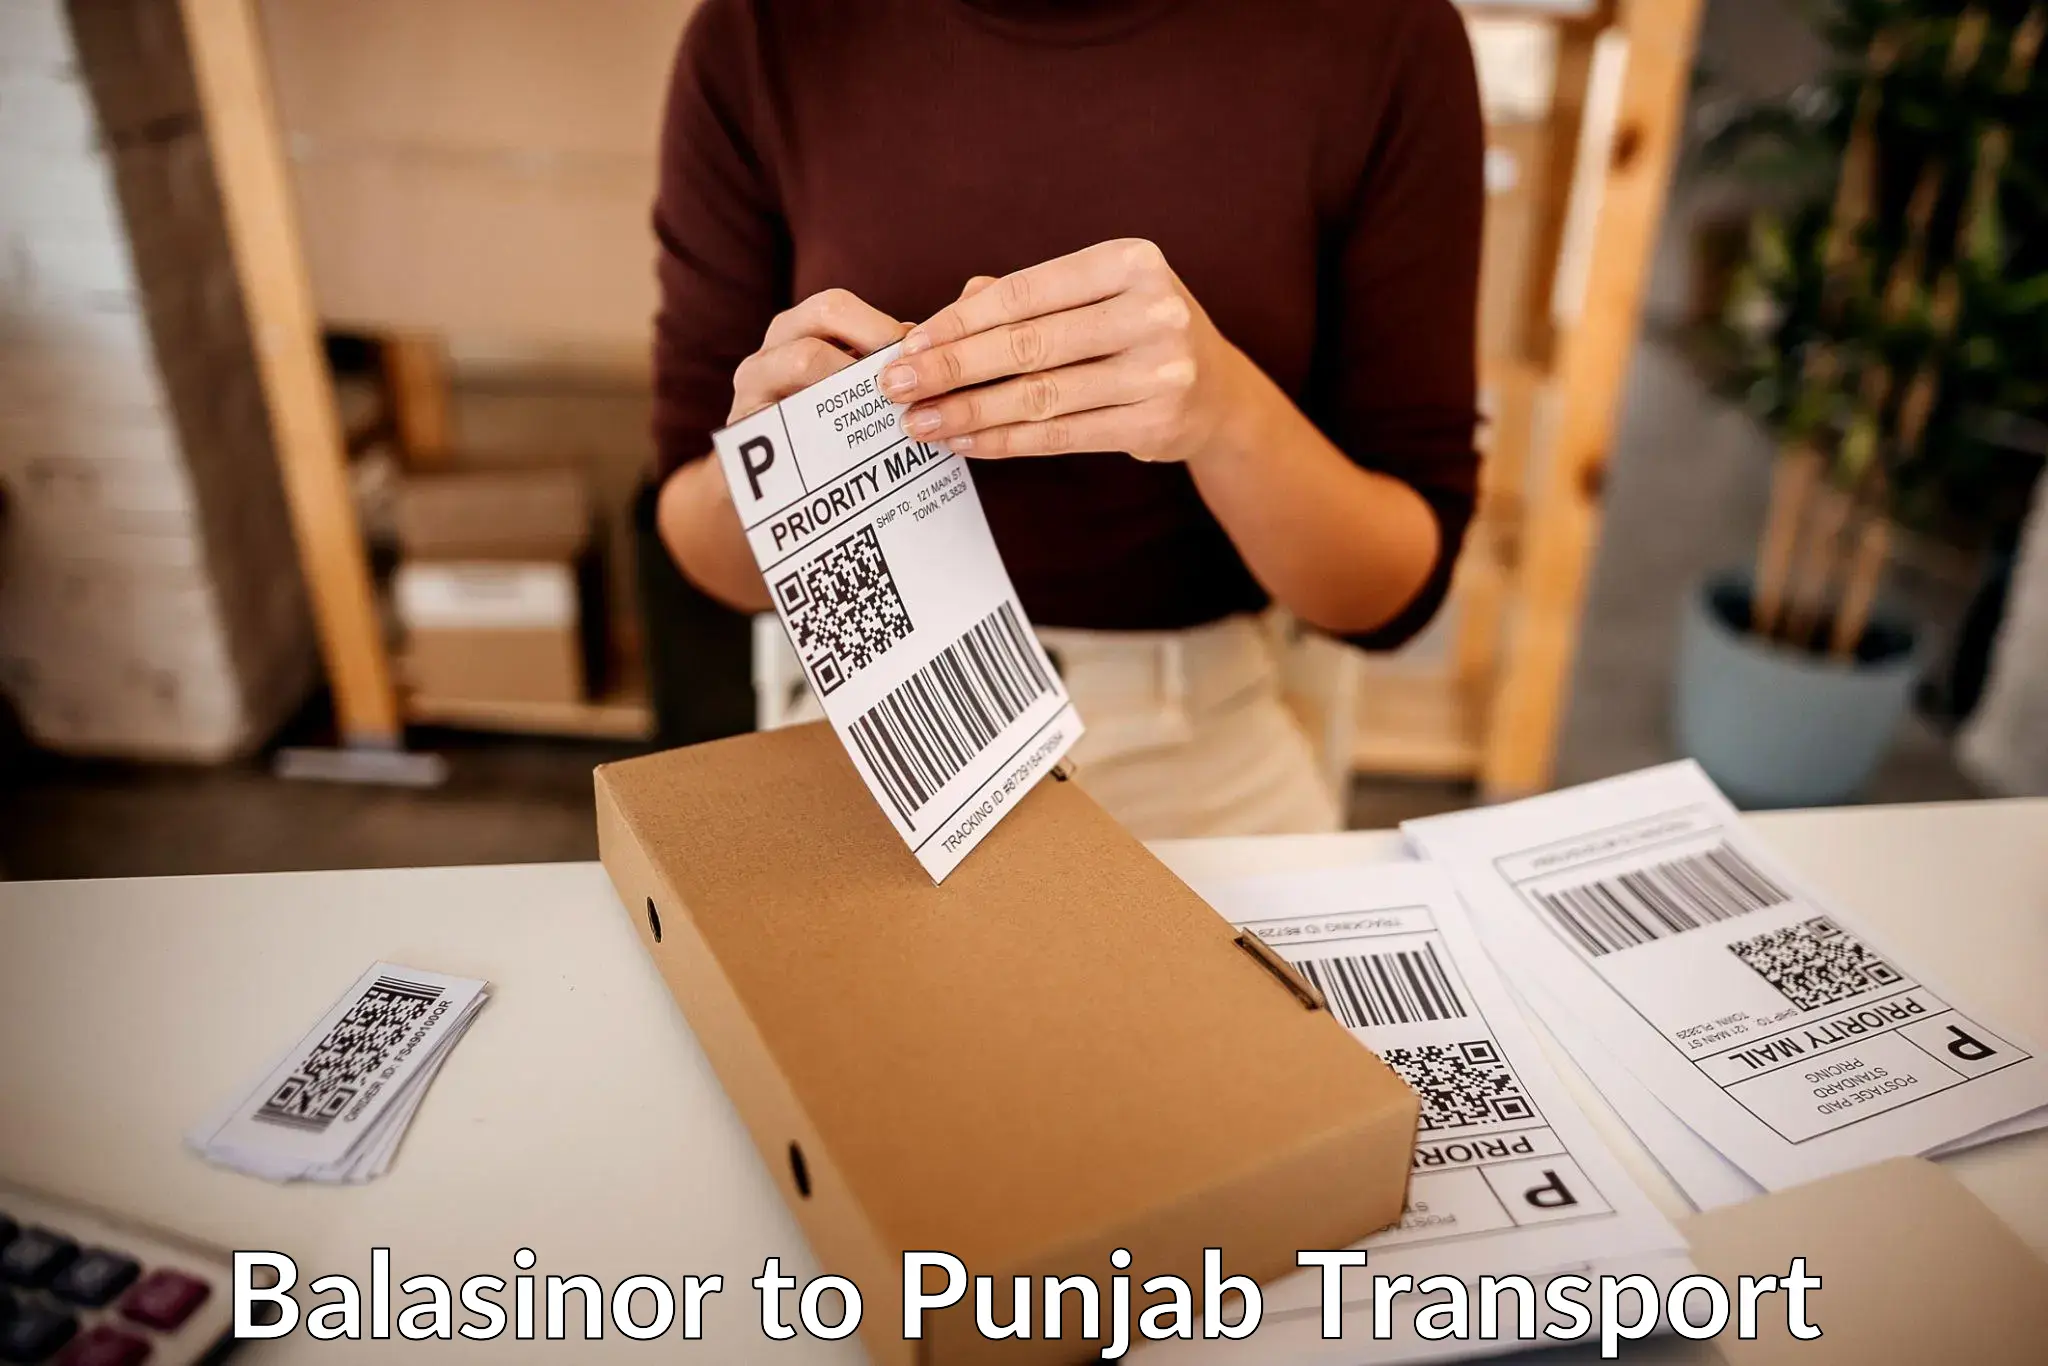 Truck transport companies in India Balasinor to Pathankot